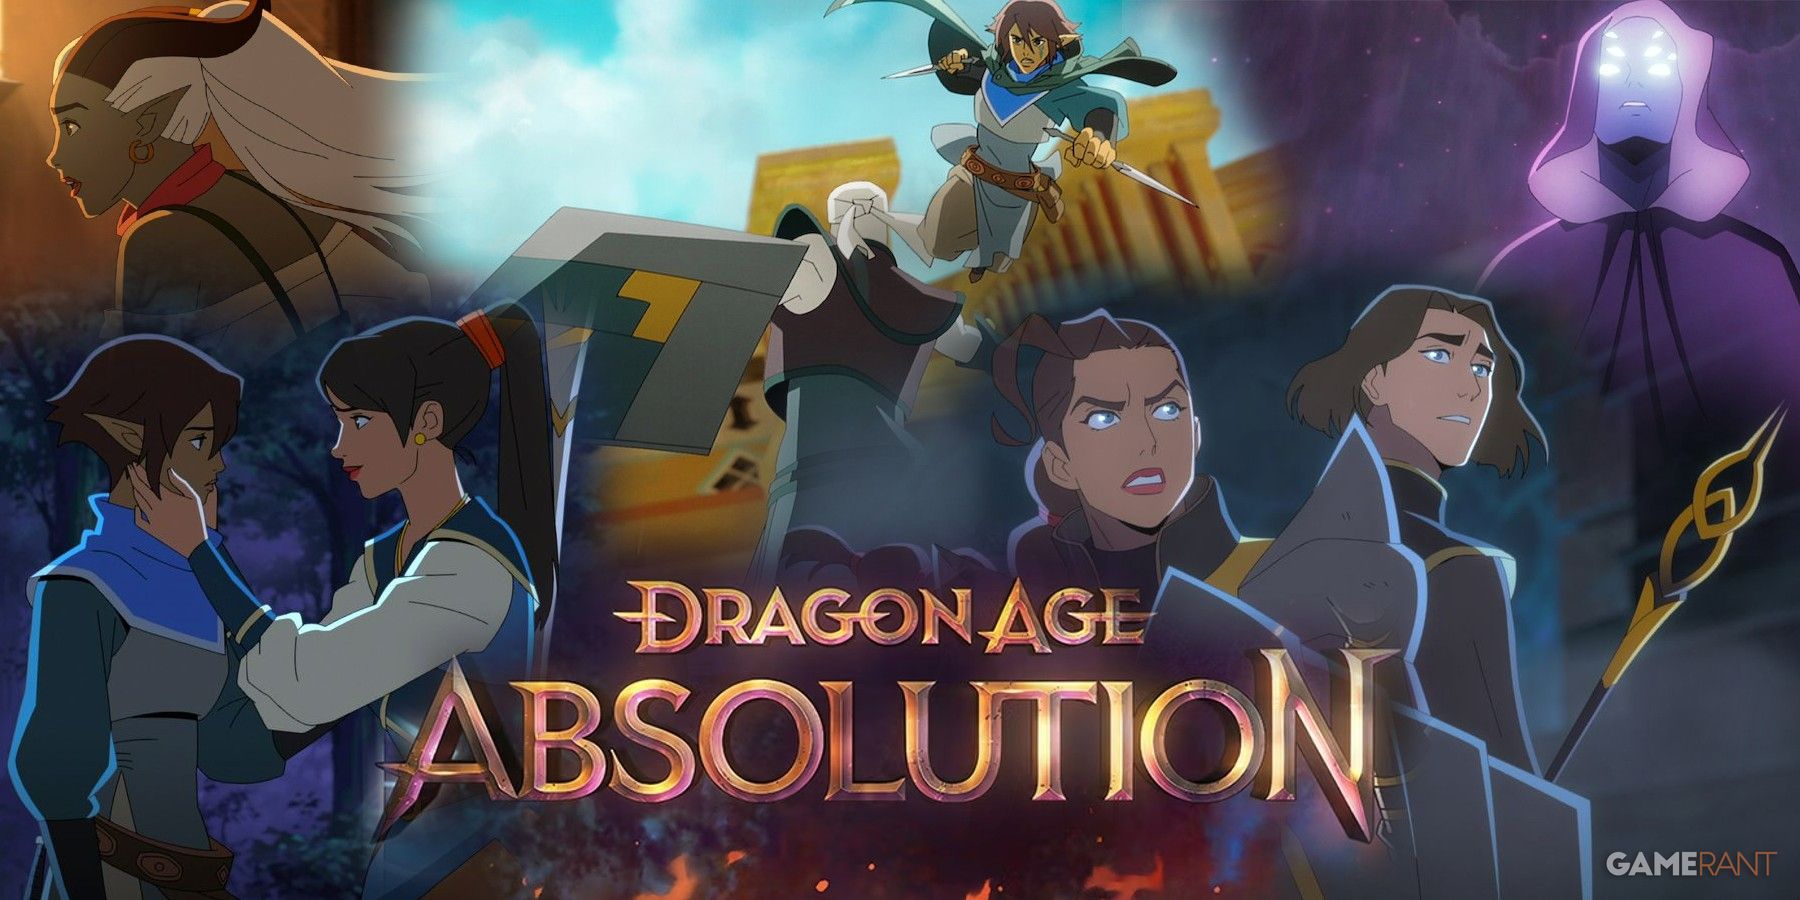 Dragon Age: Absolution Release Date, New Trailer, and Voice Cast Revealed -  IGN